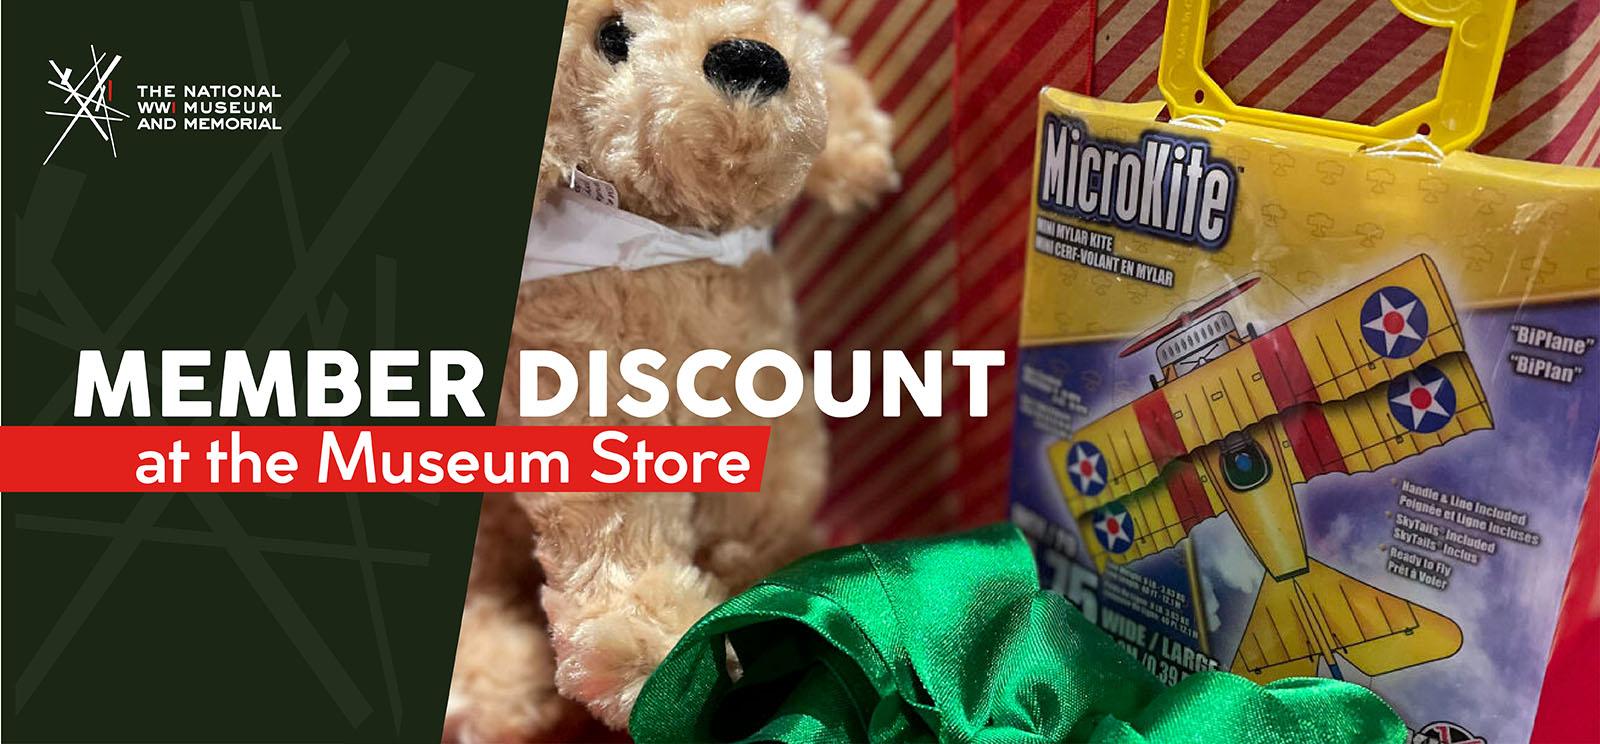 Image: Modern photograph of a pile of gifts including a golden dog plushie and a biplane-shaped kite. Text: 'Member Discount at the Museum Store'